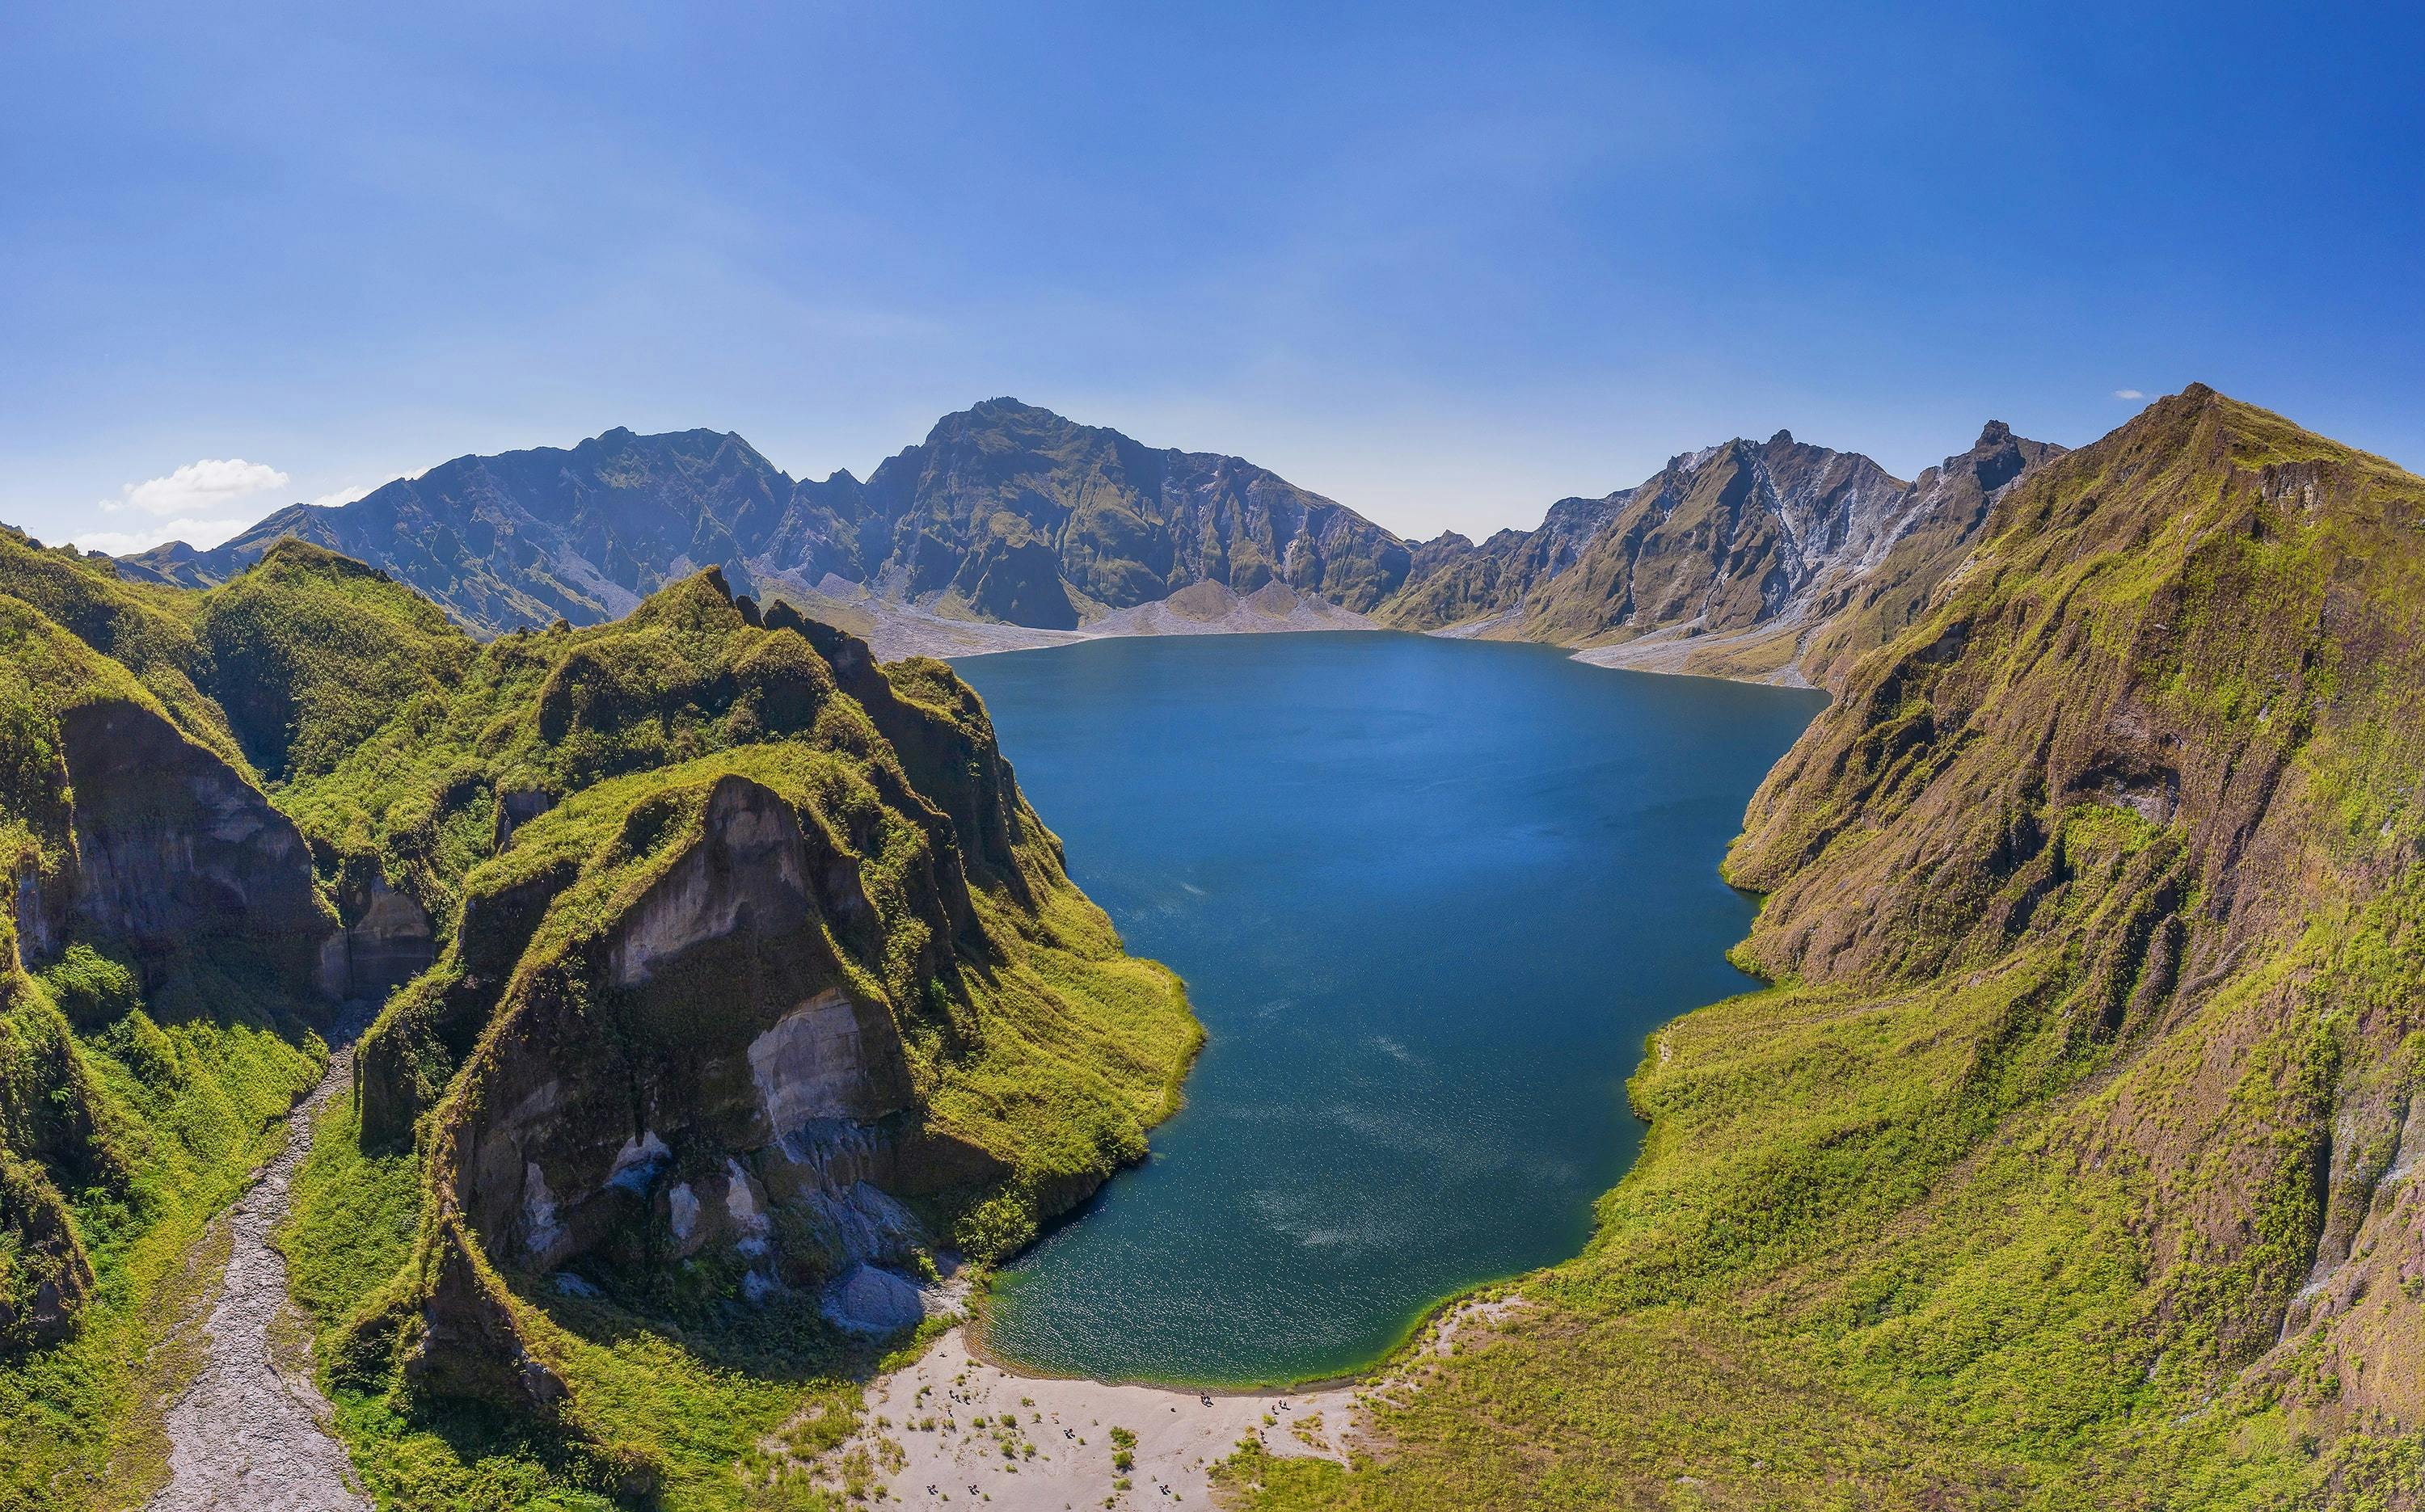 View of the Mt. Pinatubo Crater Lake